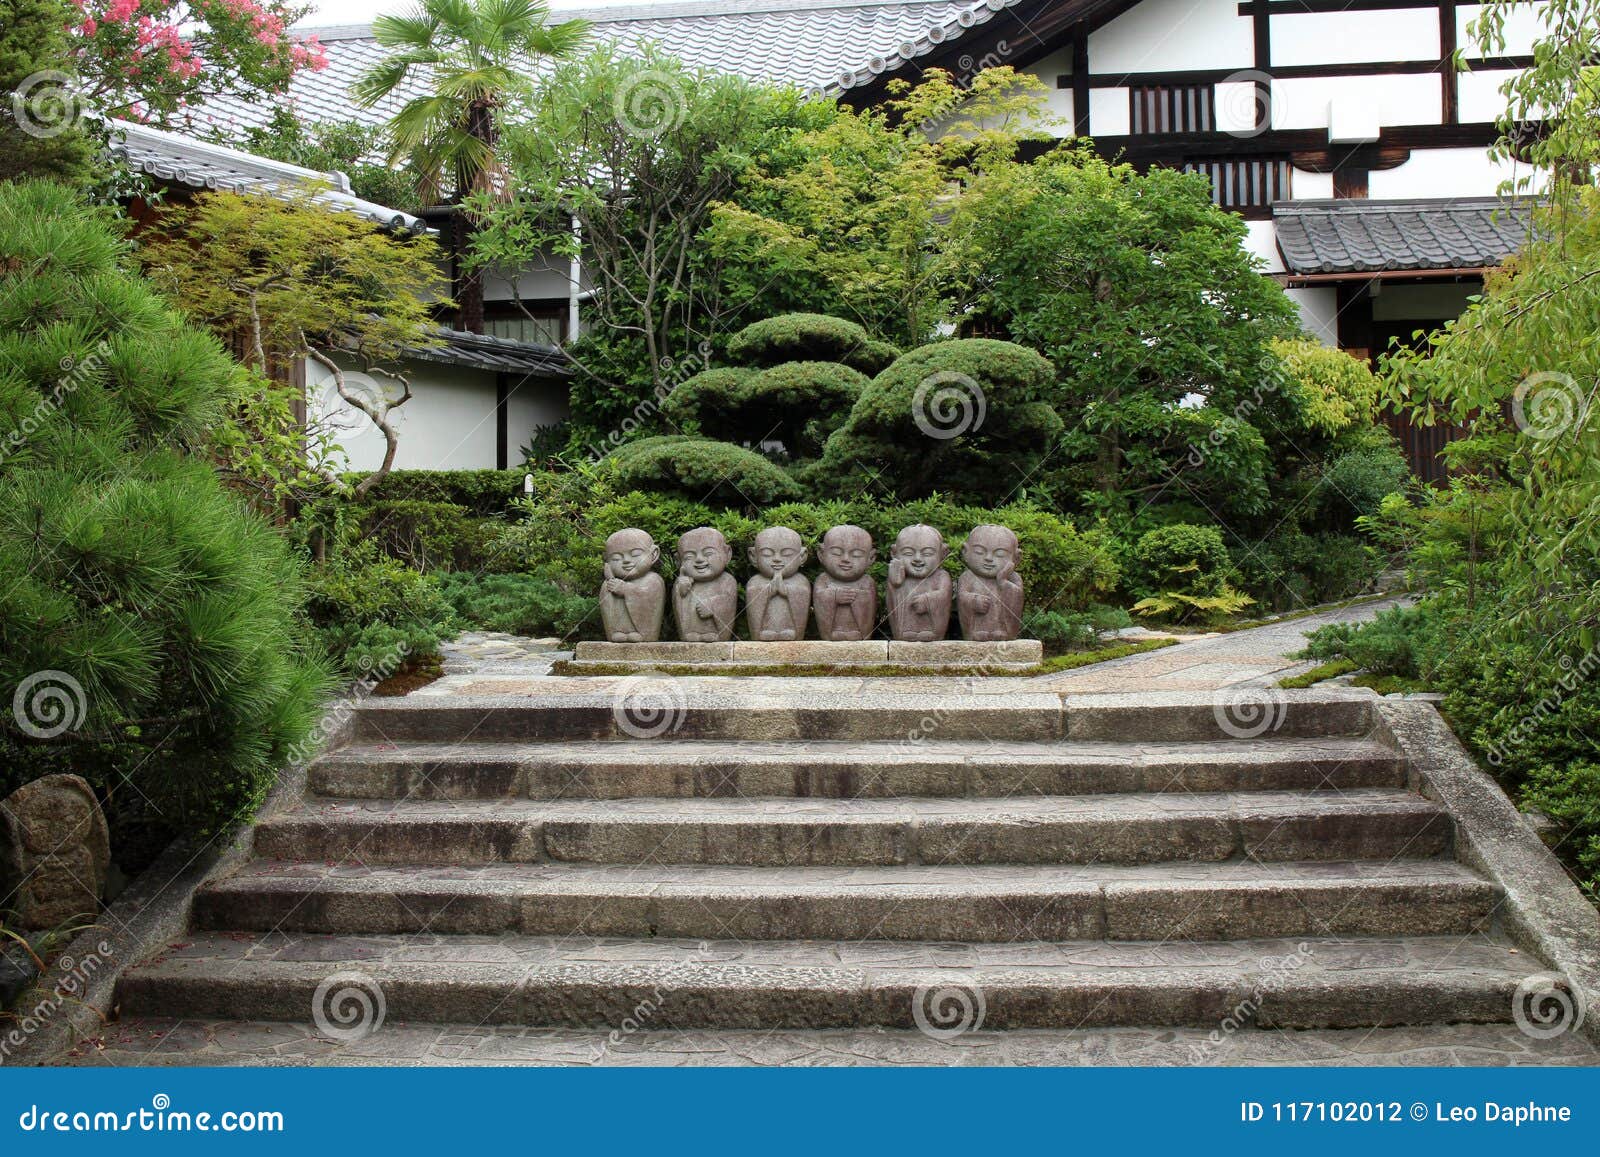 The Statues Of Little Buddhas At A Garden Stock Photo Image Of